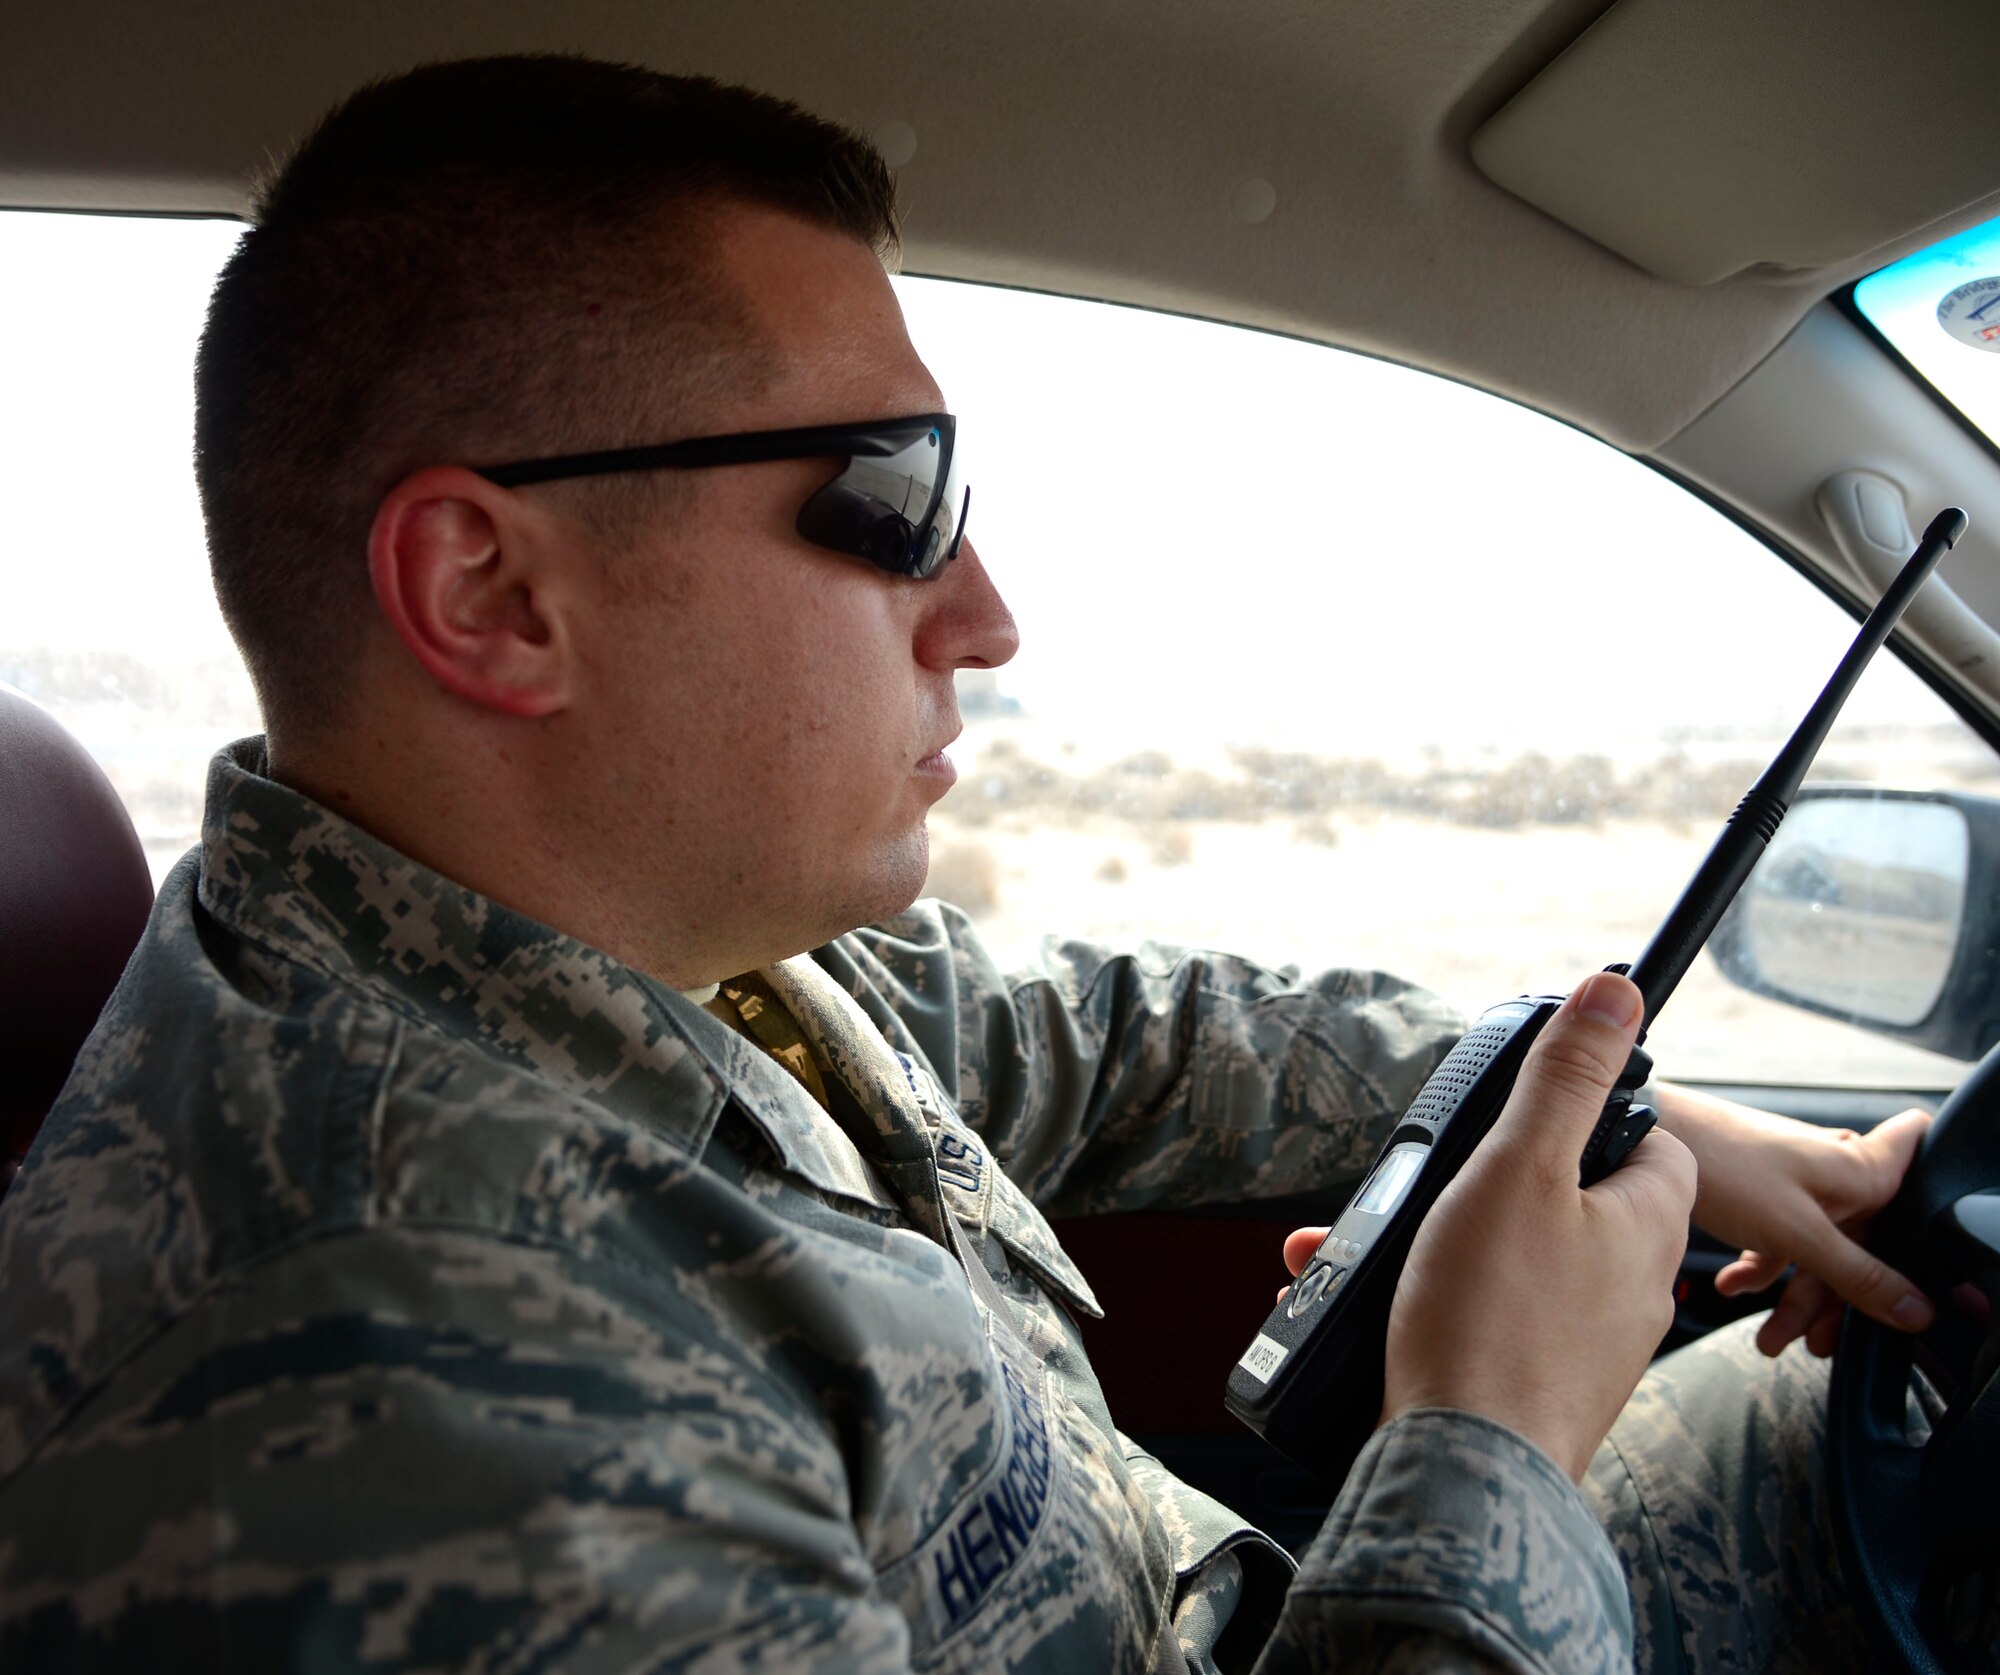 U.S. Air Force Senior Airman Andrew Henggeler, 386 Operations Support Squadron airfield management shift leader, calls to Airmen in the tower during Operation Inherent Resolve at an undisclosed location in Southwest Asia, Aug. 4, 2015. Since August 2014, the Air Force has flown 70 percent of the airstrikes against Da’esh, making airfield management an integral strategic component. (U.S. Air Force photo by Senior Airman Racheal E. Watson/Released)